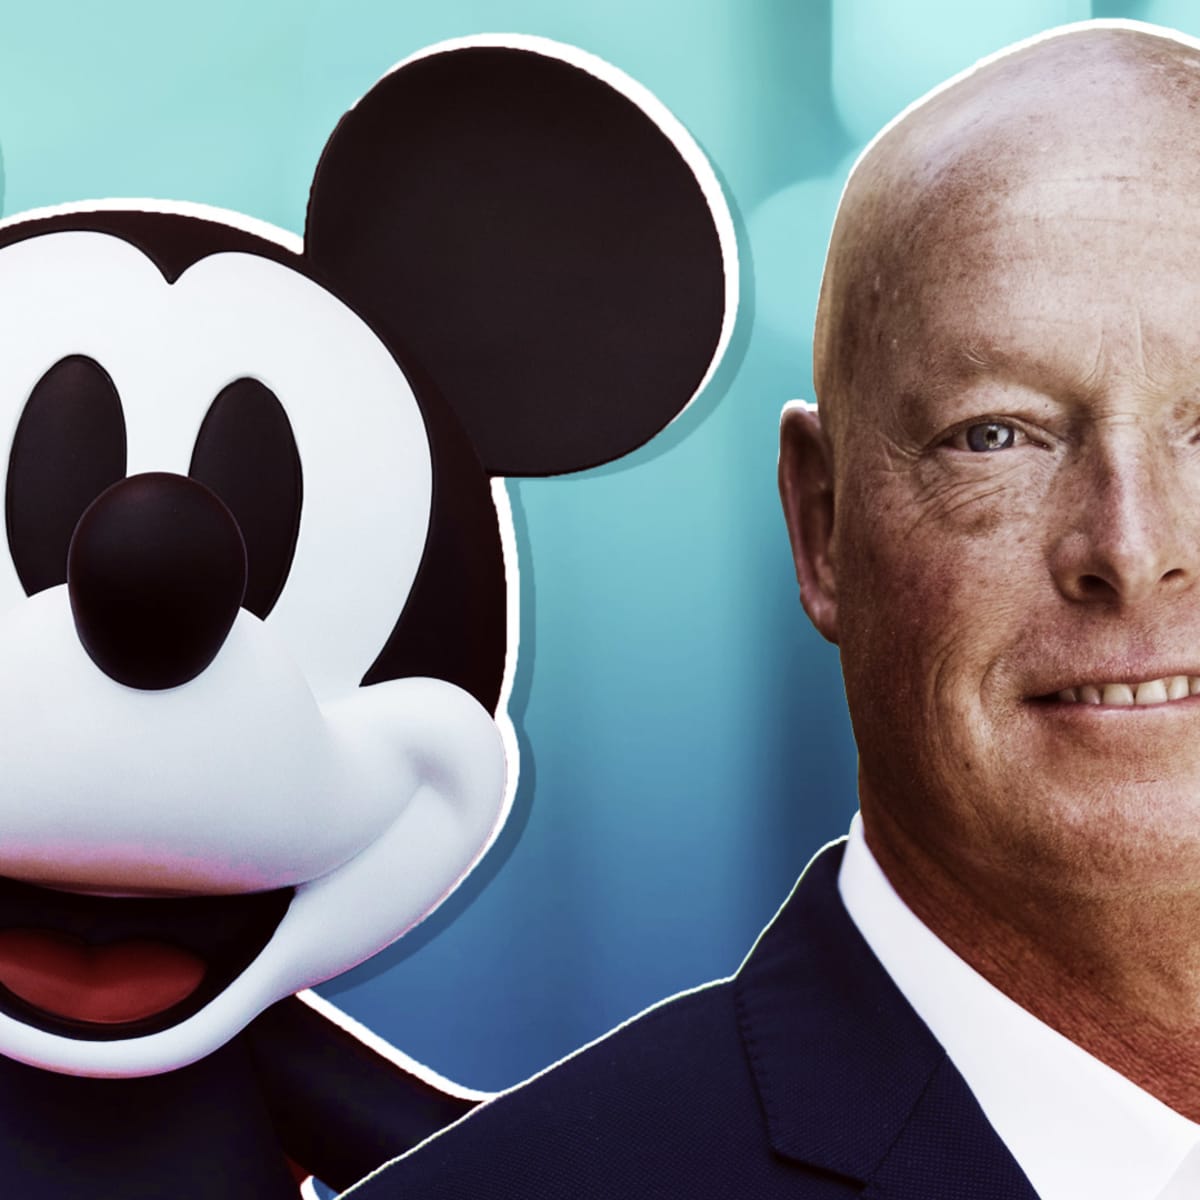 thestreet.com - Michael Tedder - Disney+ Is Open to Advertising, With a Few Big Exceptions